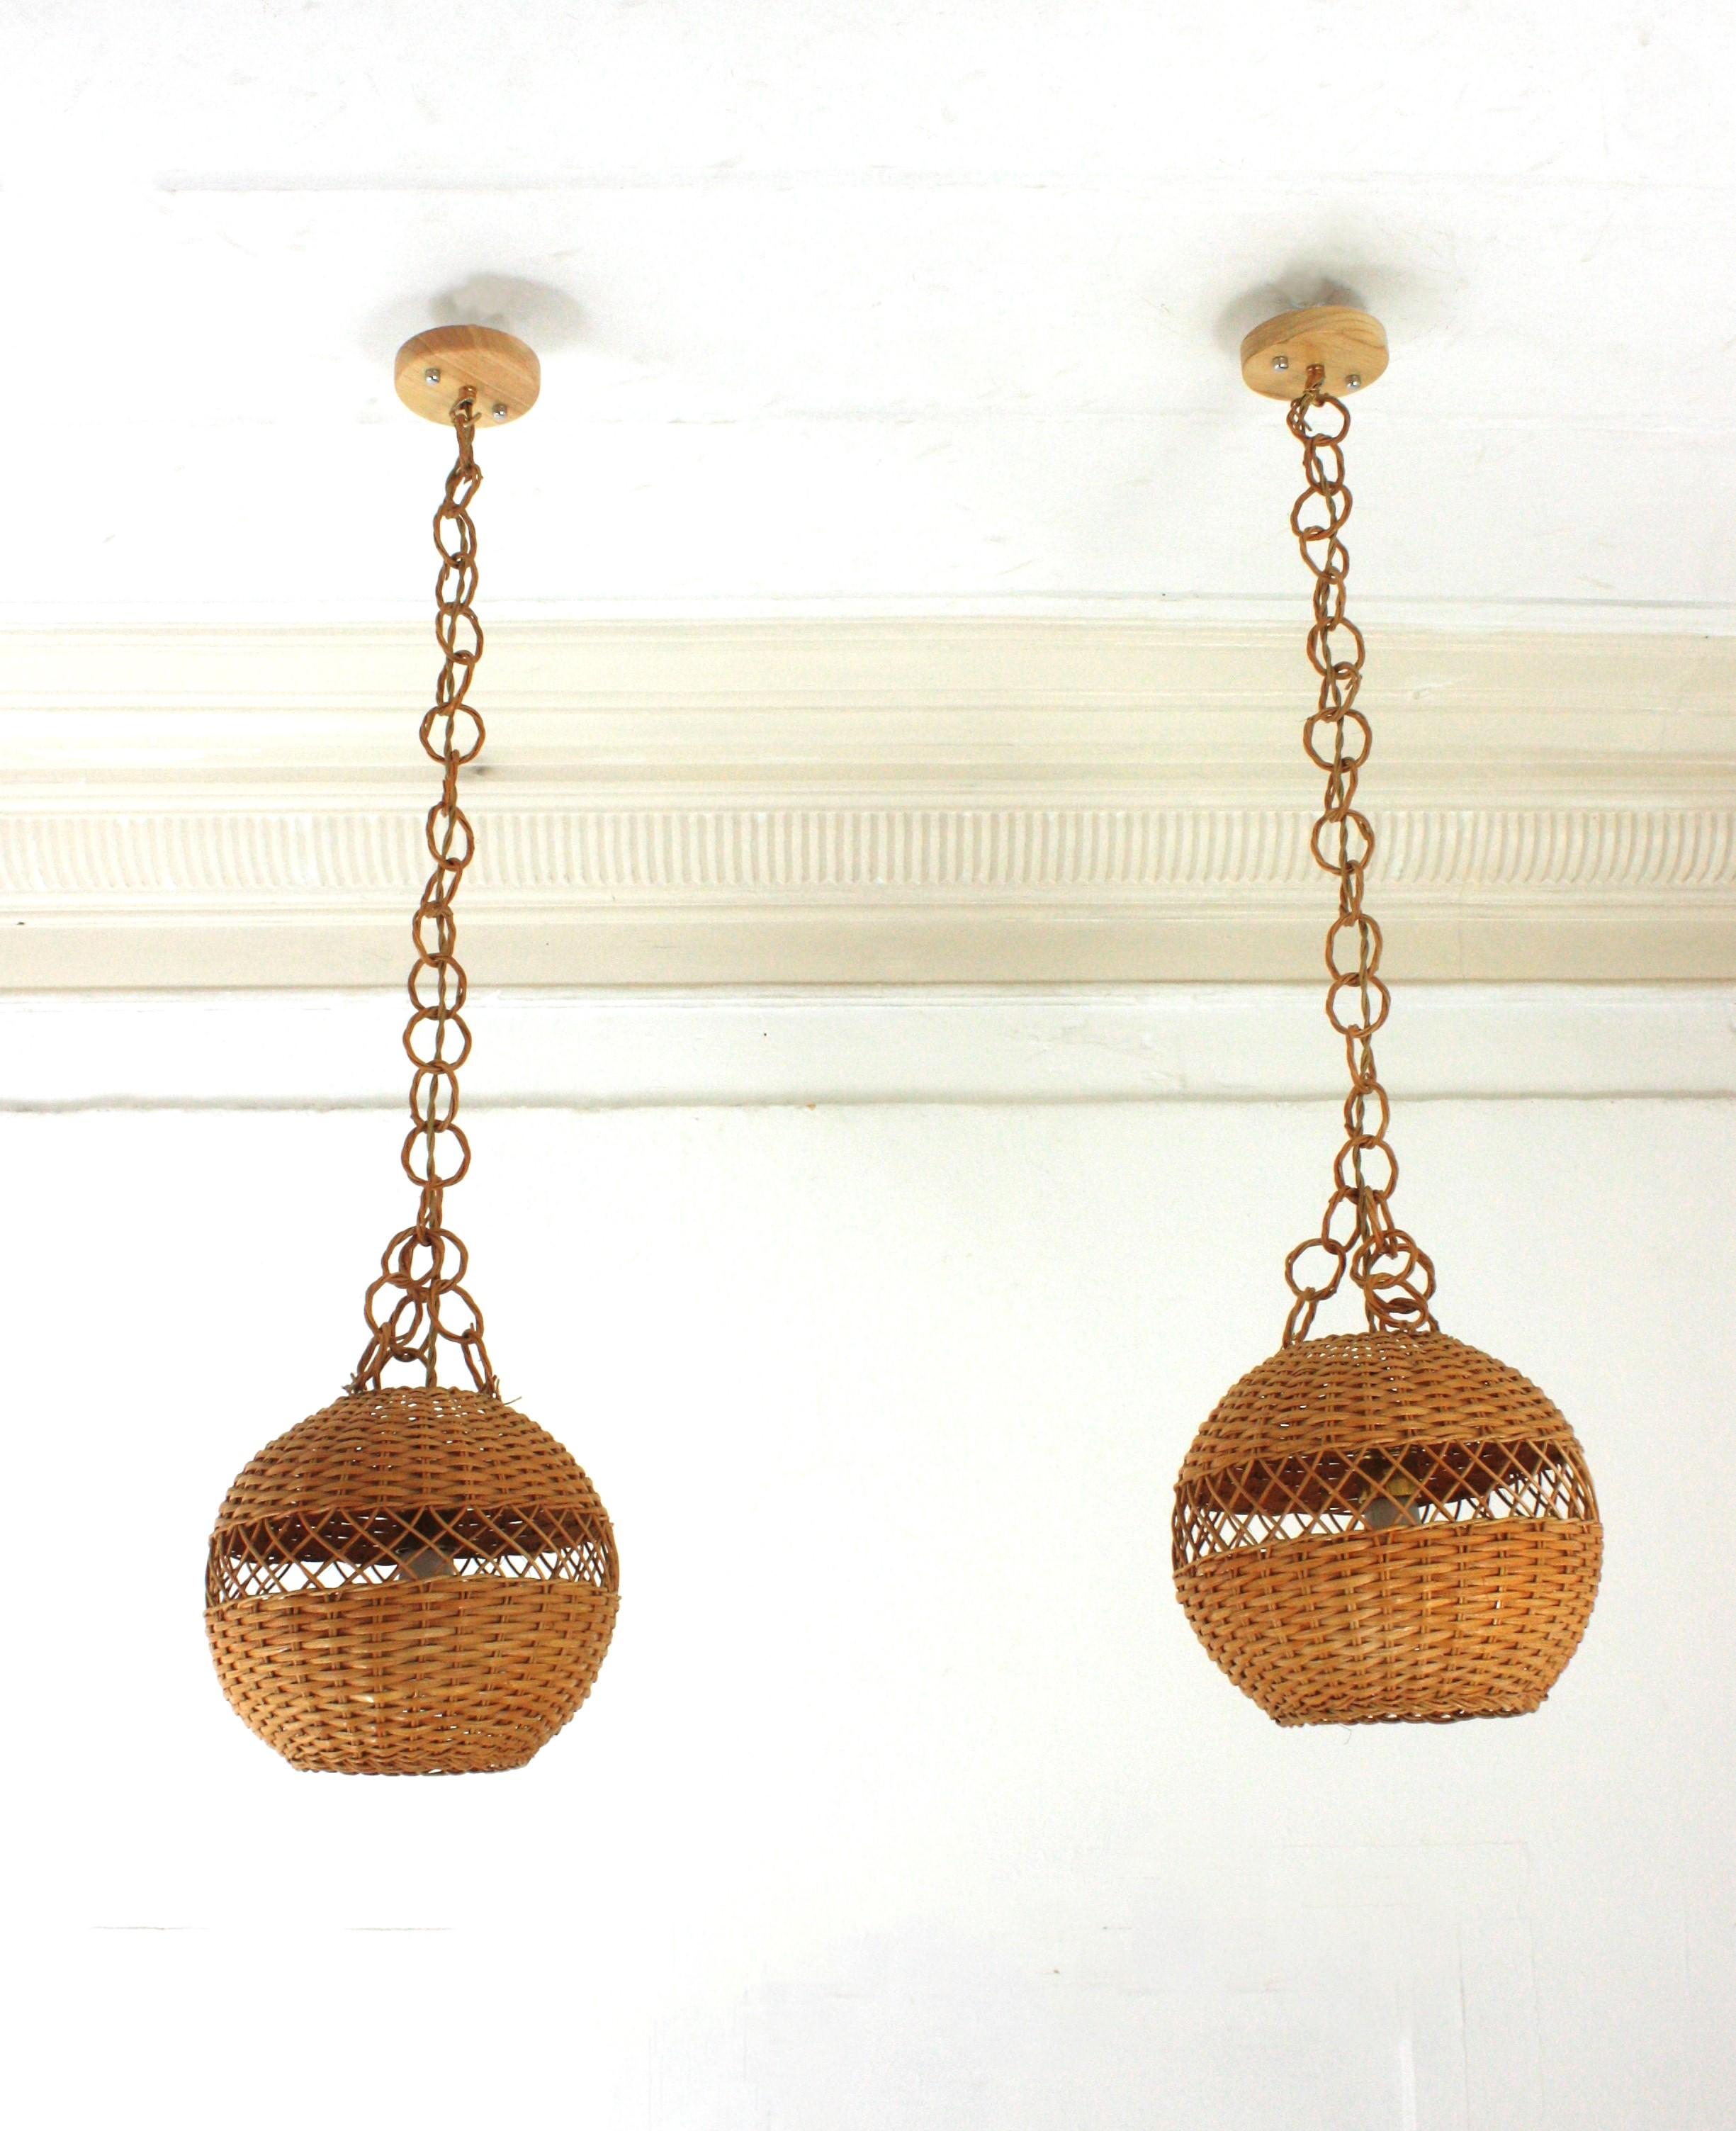 Pair of Handwoven Wicker Globe Pendant Lights or Lanterns In Good Condition For Sale In Barcelona, ES